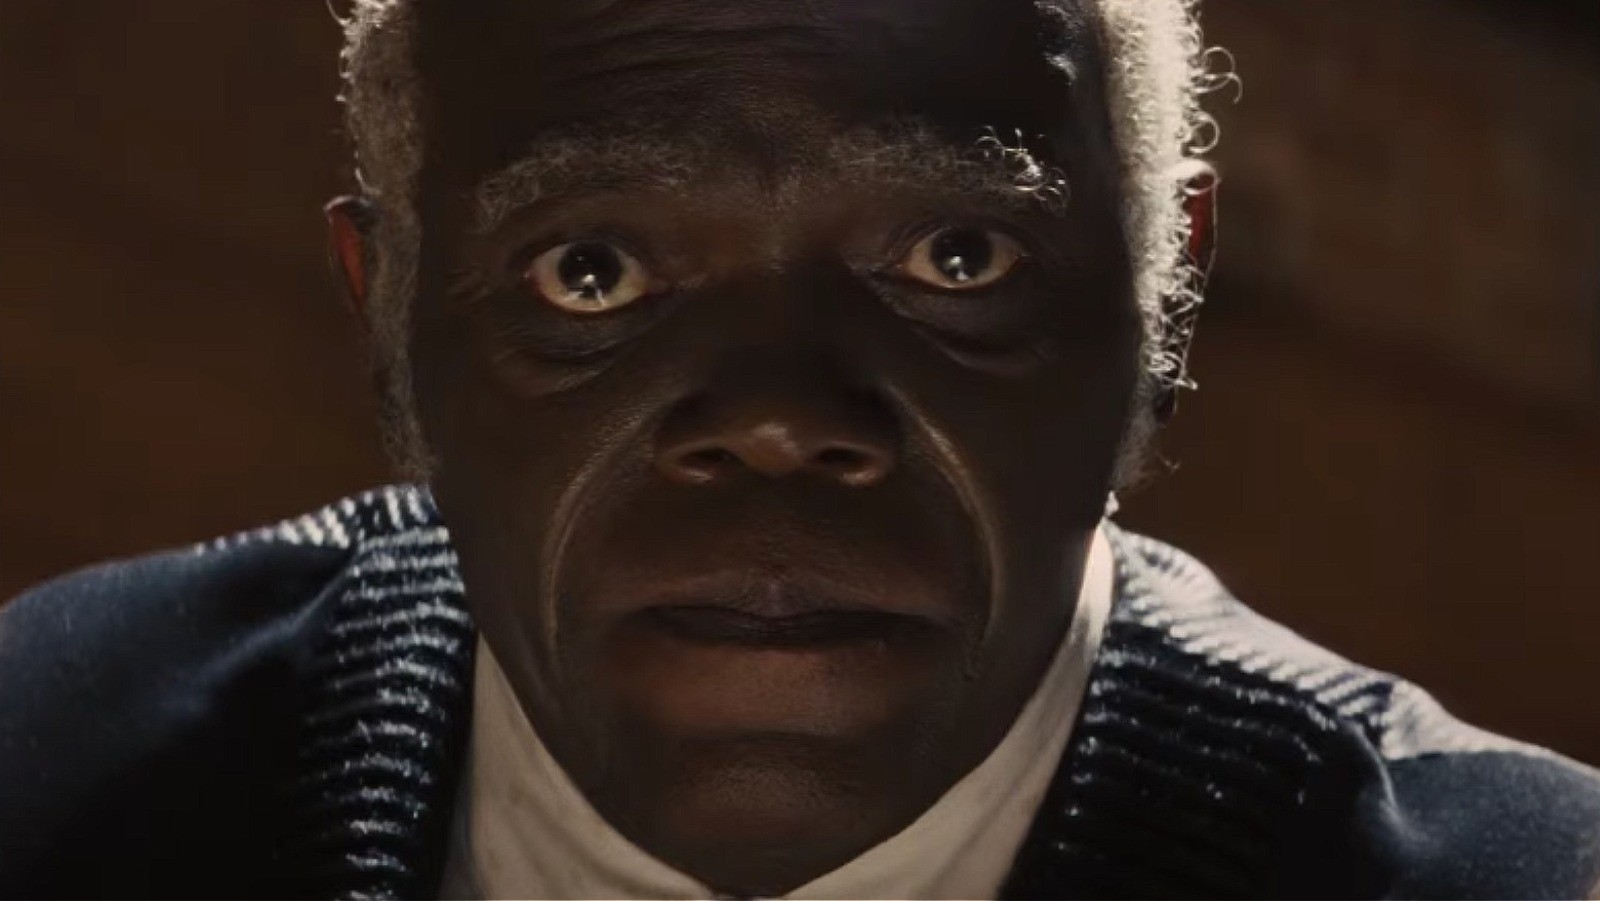 Samuel L. Jackson believes Stephen was the best character he has played in a Quentin Tarantino film